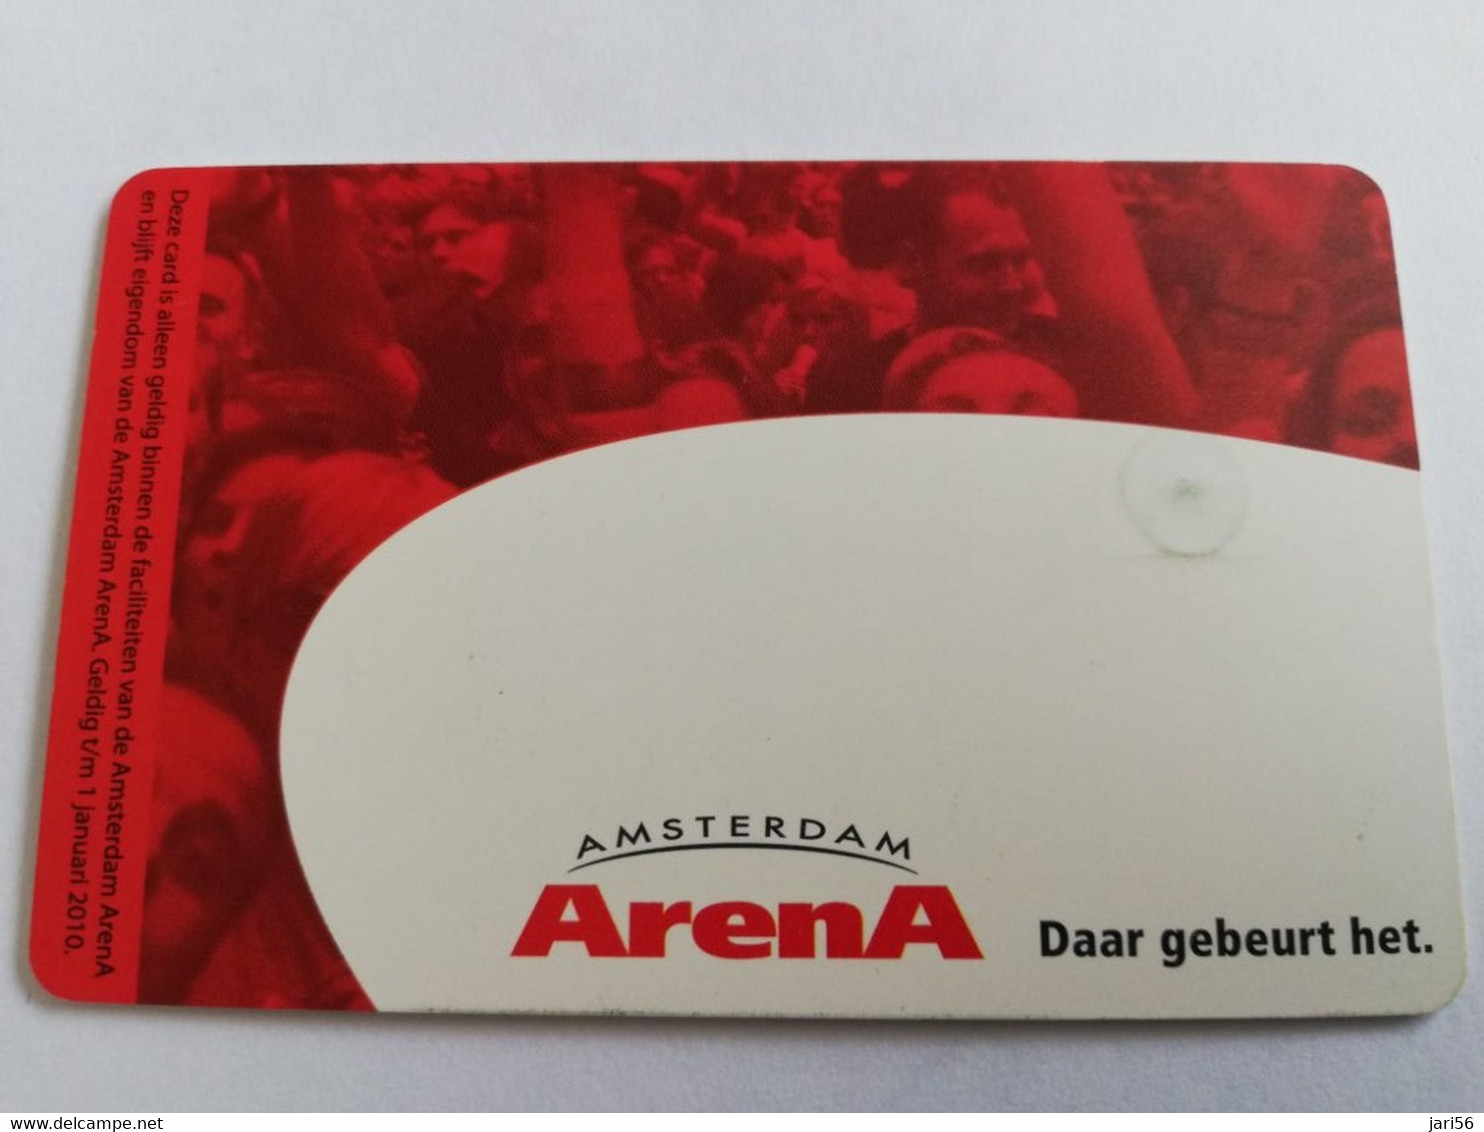 NETHERLANDS CHIPCARD €20,- ARENA CARD / BRUCE SPRINGSTEEN     /MUSIC   - USED CARD  ** 9457** - Publiques